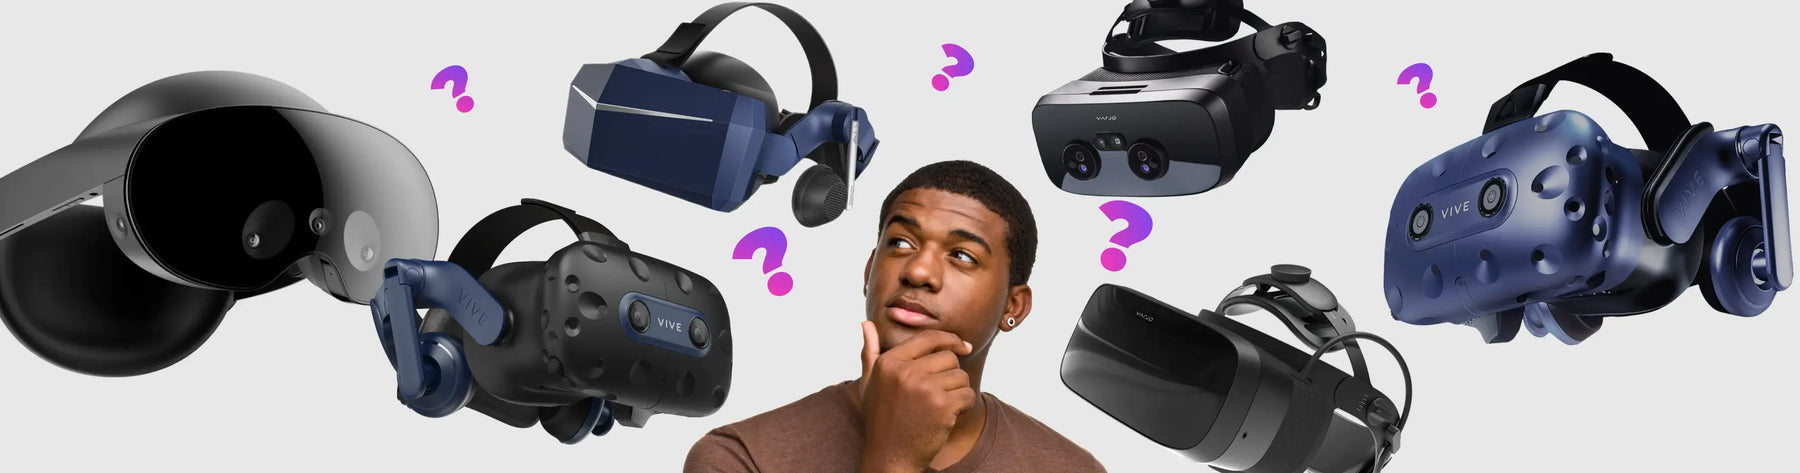 What to Consider Before Buying a VR Headset: VR Headset Buying Guide